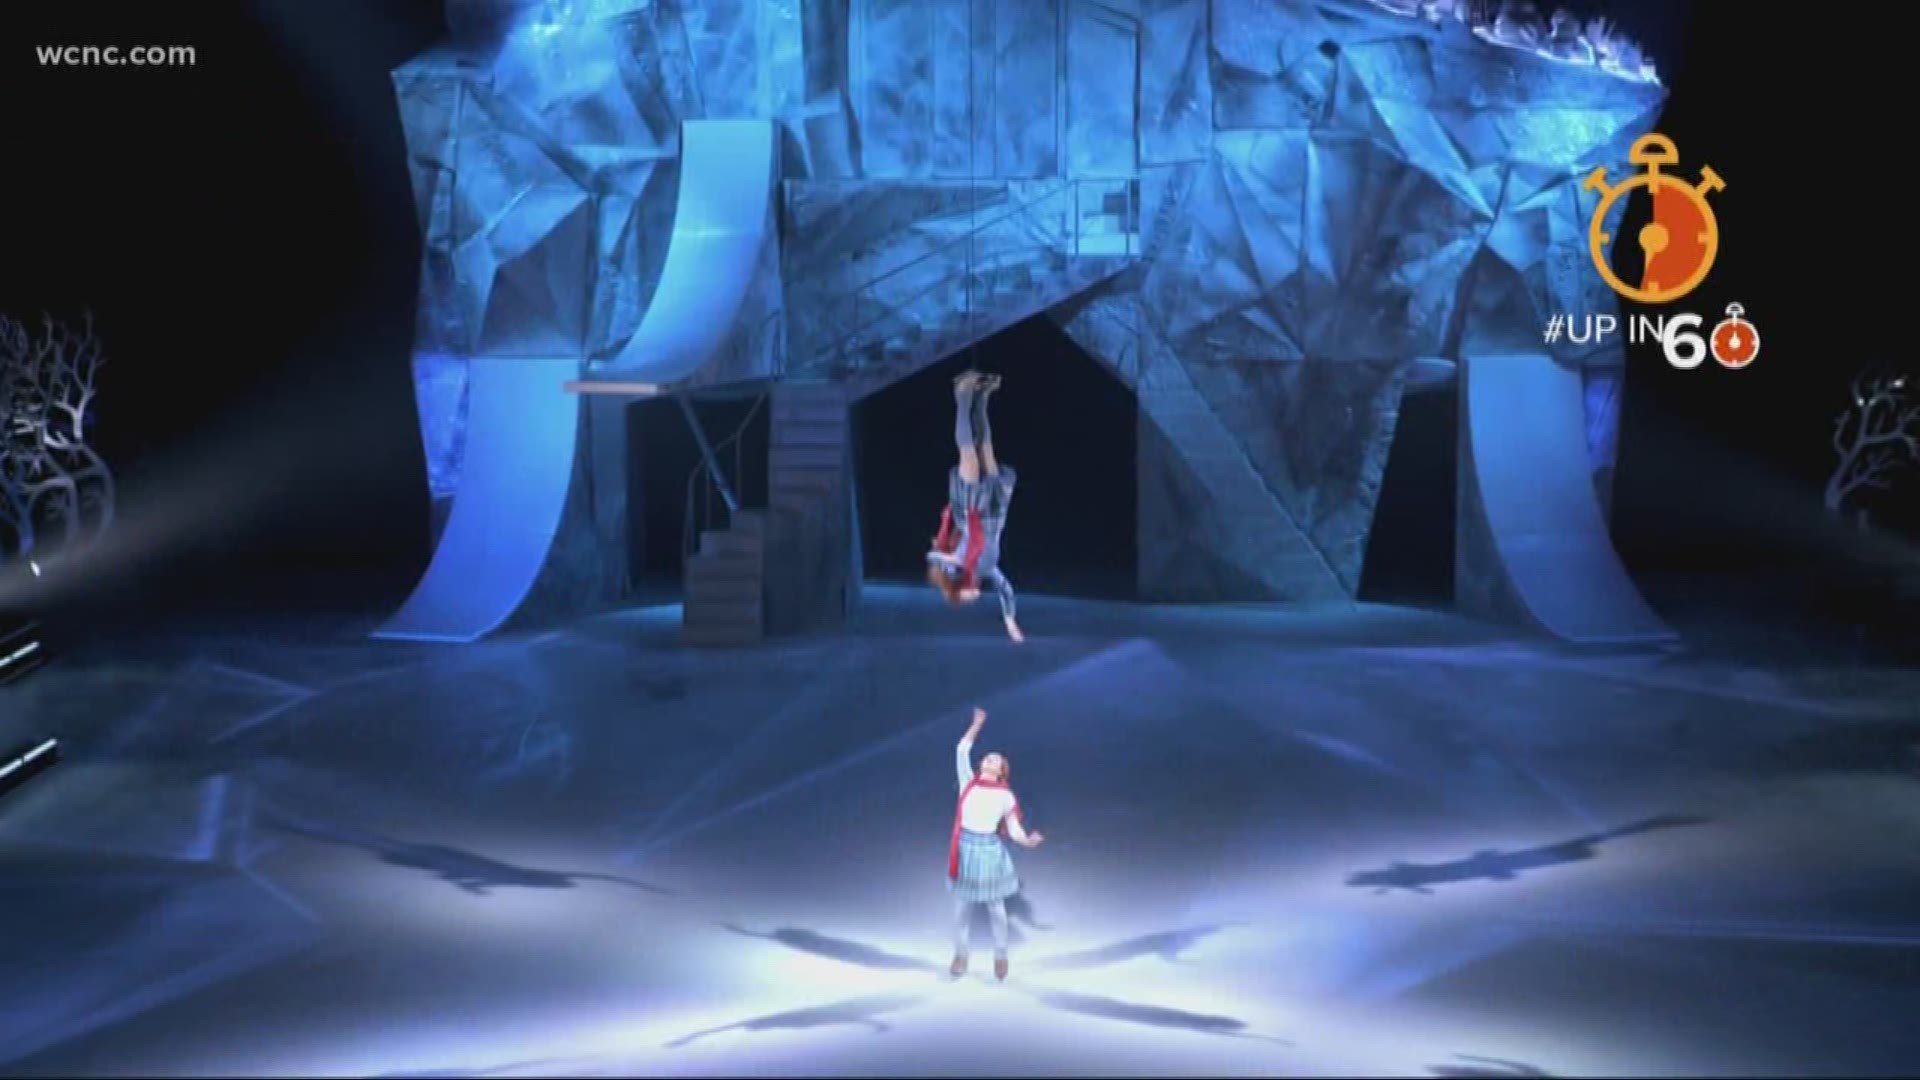 Cirque du Soleil is known for its magic and creative acrobatics. Now, the show is combining their performance with ice skating and it's coming to Charlotte this weekend.